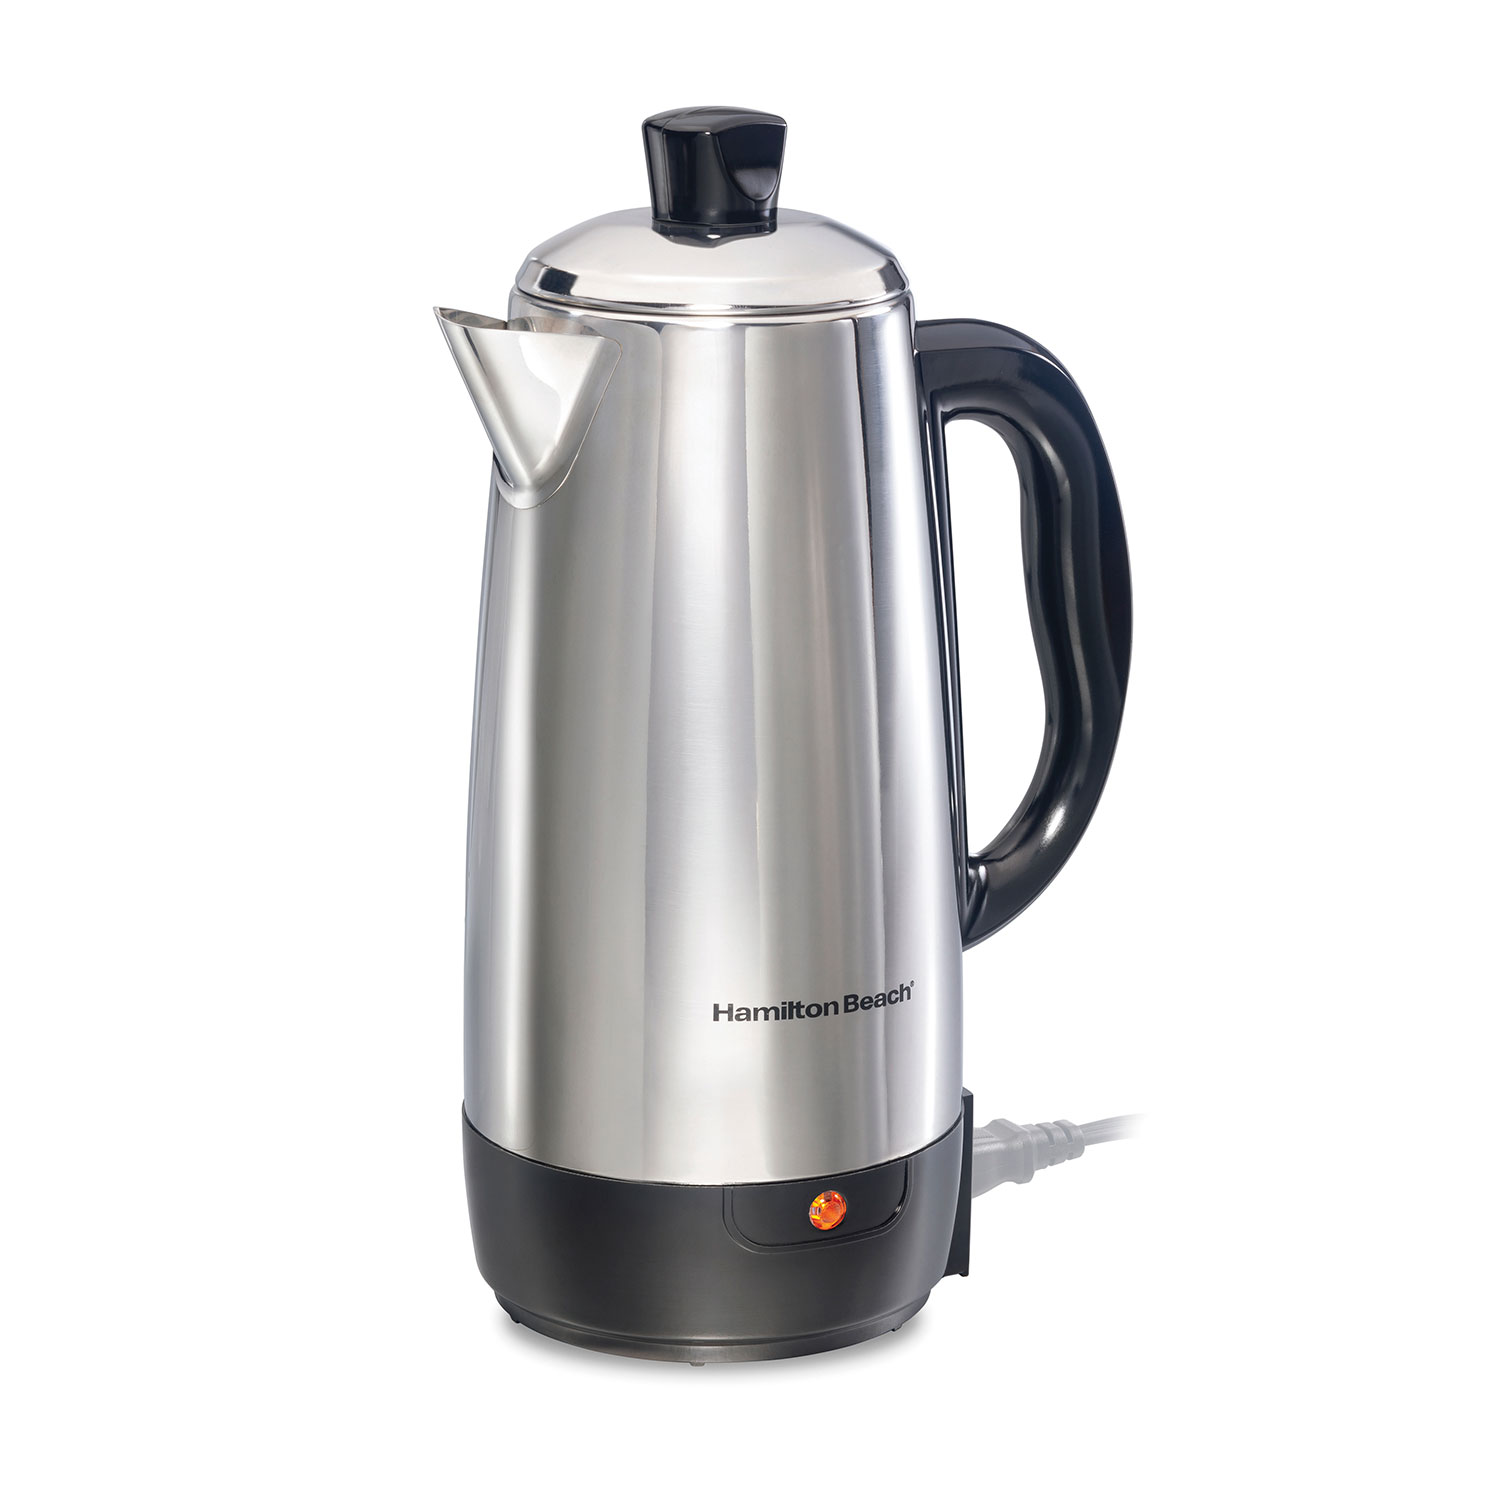 12 Cup Percolator with Cool-Touch Handle, Stainless Steel (40616R)